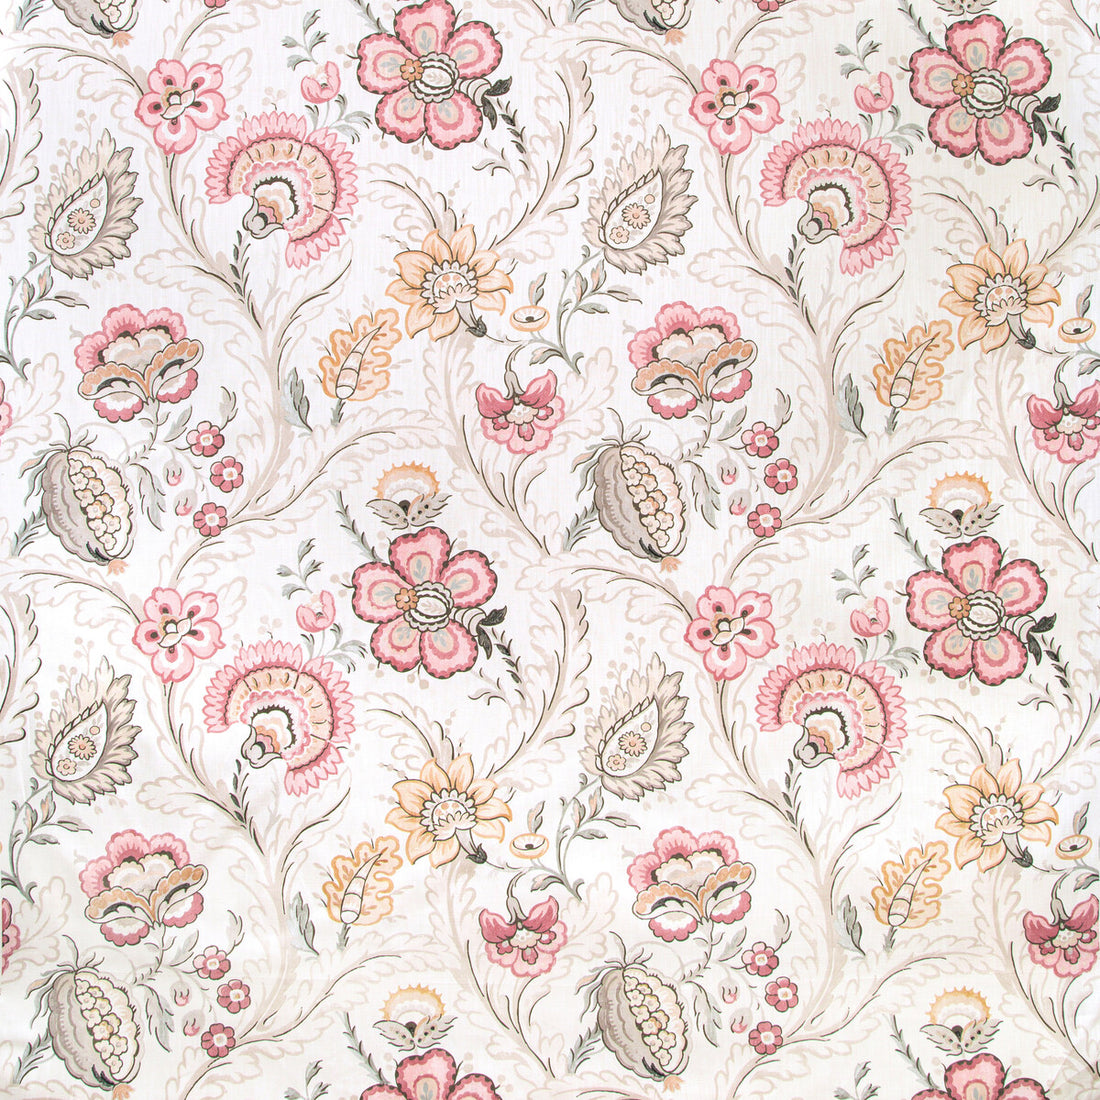 Wimberly Print fabric in blush/stone color - pattern 2020186.711.0 - by Lee Jofa in the Avondale collection